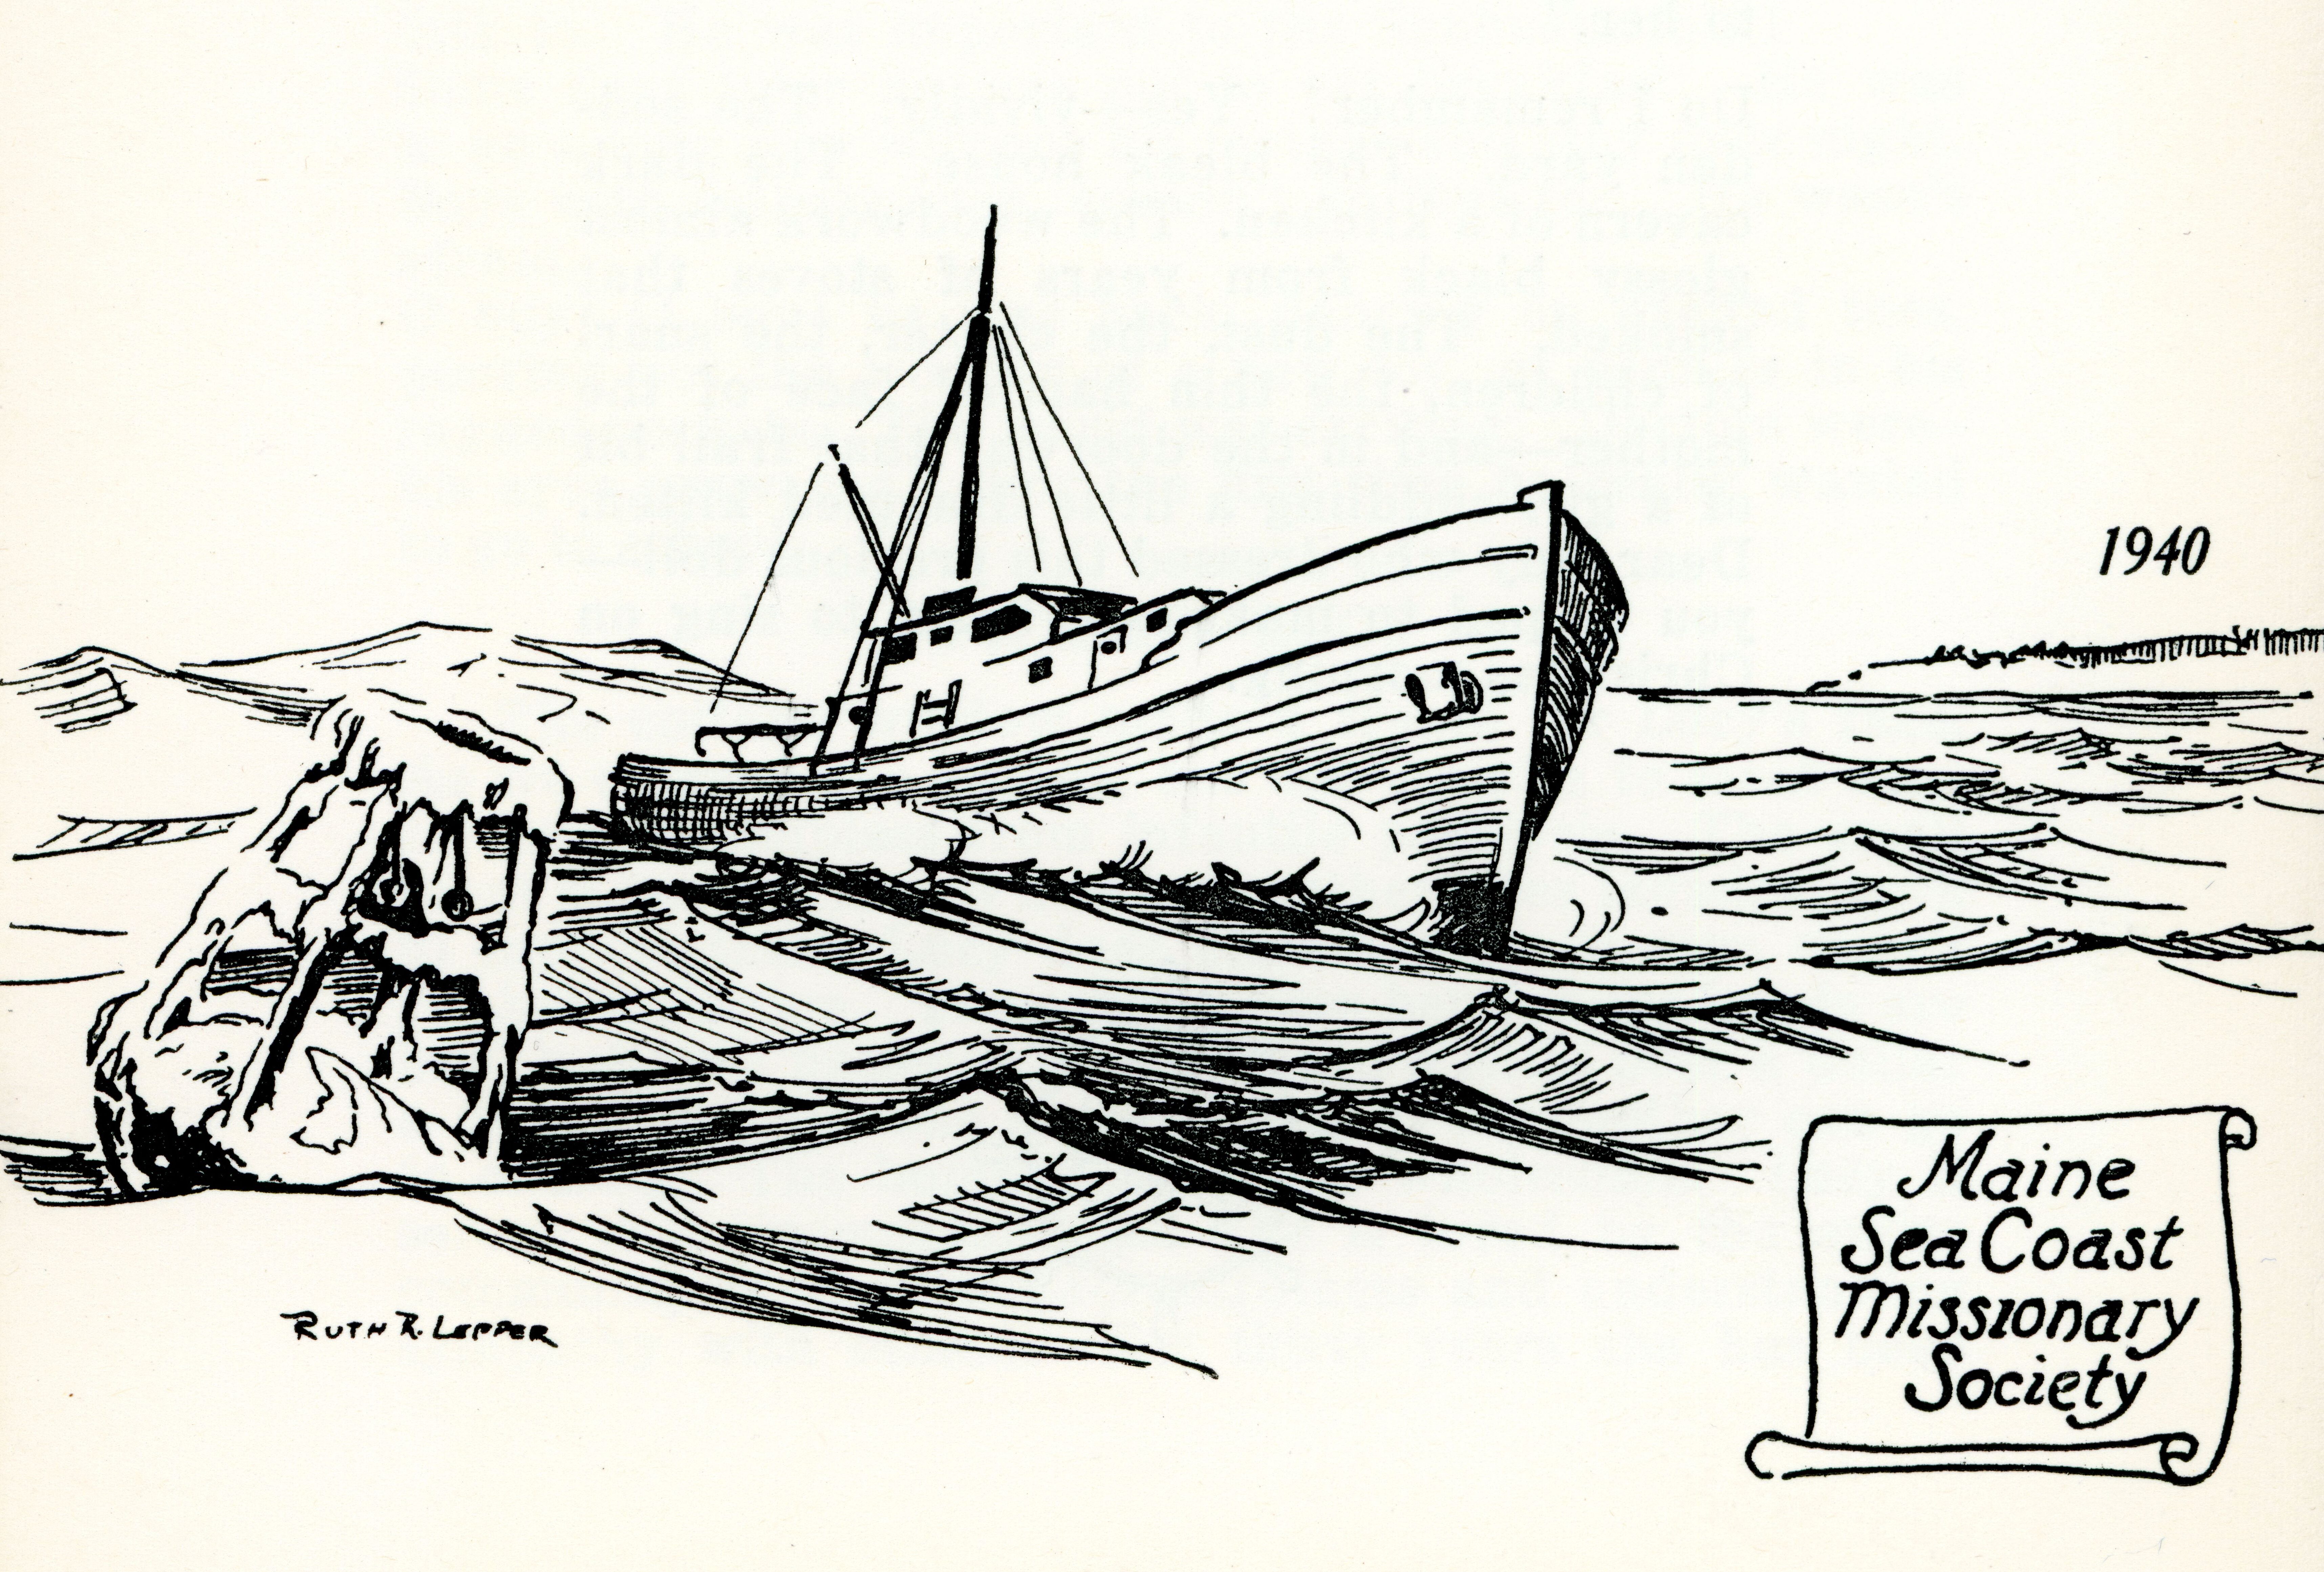 A pen and ink drawing of a boat in the ocean with the words "Maine Sea Coast Missionary Society" and "1940" included